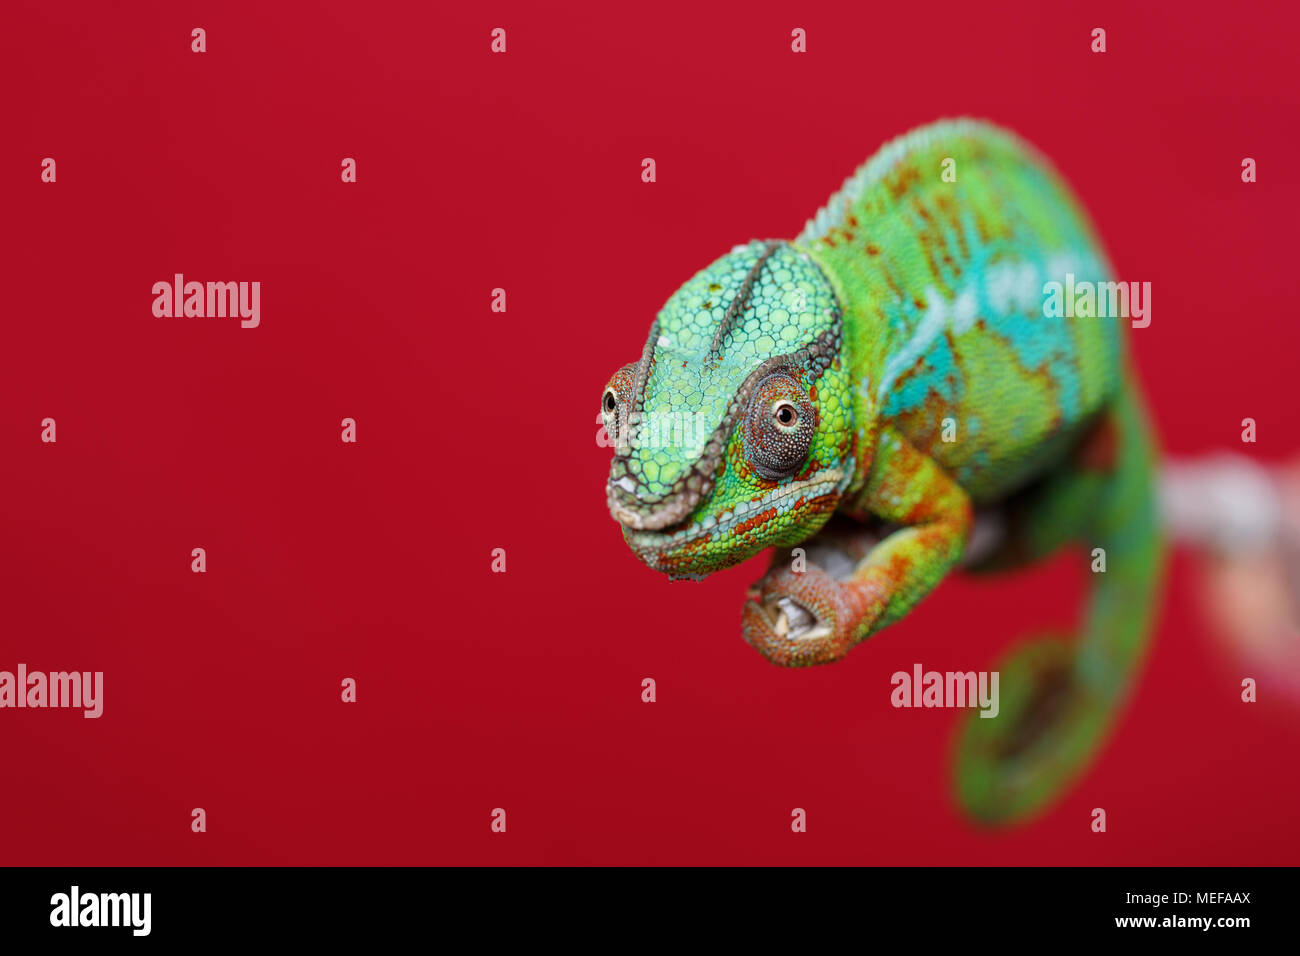 alive chameleon reptile sitting on branch. studio shot over red background. copy space. Stock Photo